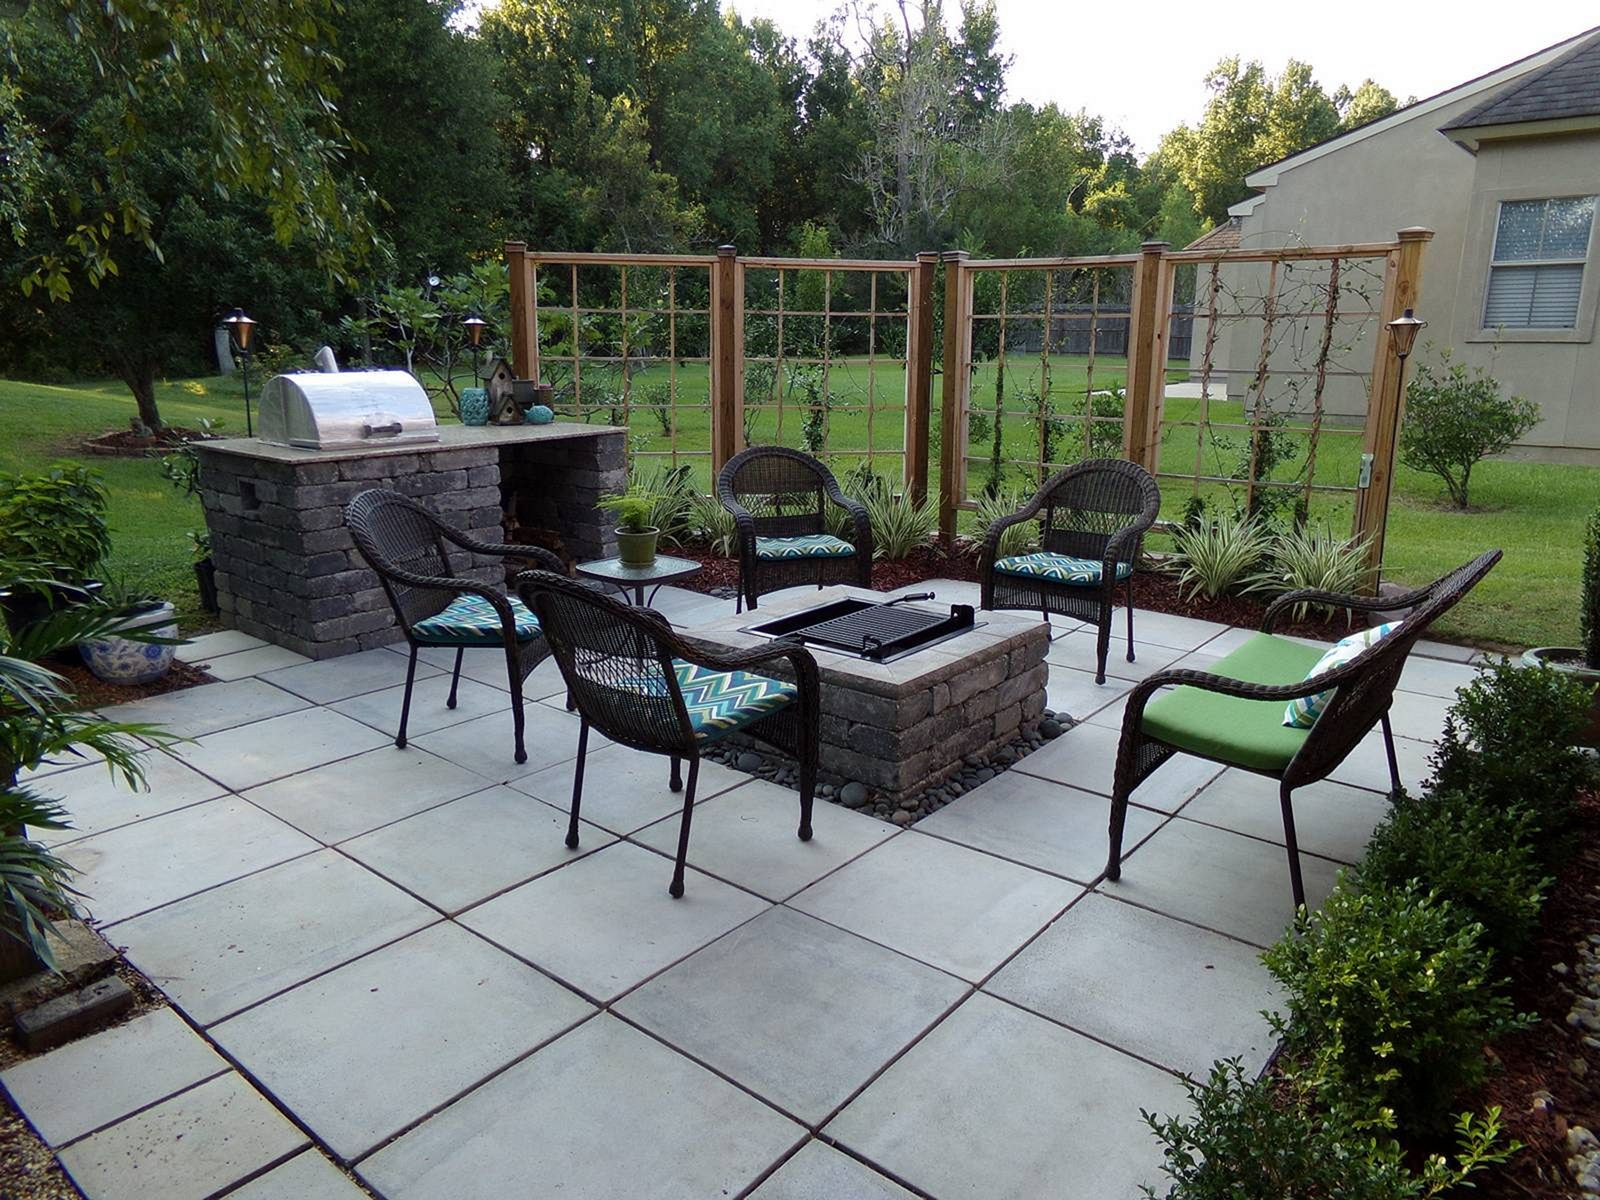 Backyard Hardscape Design
 Make Your Backyard Awesome With Our Best 20 Hardscape